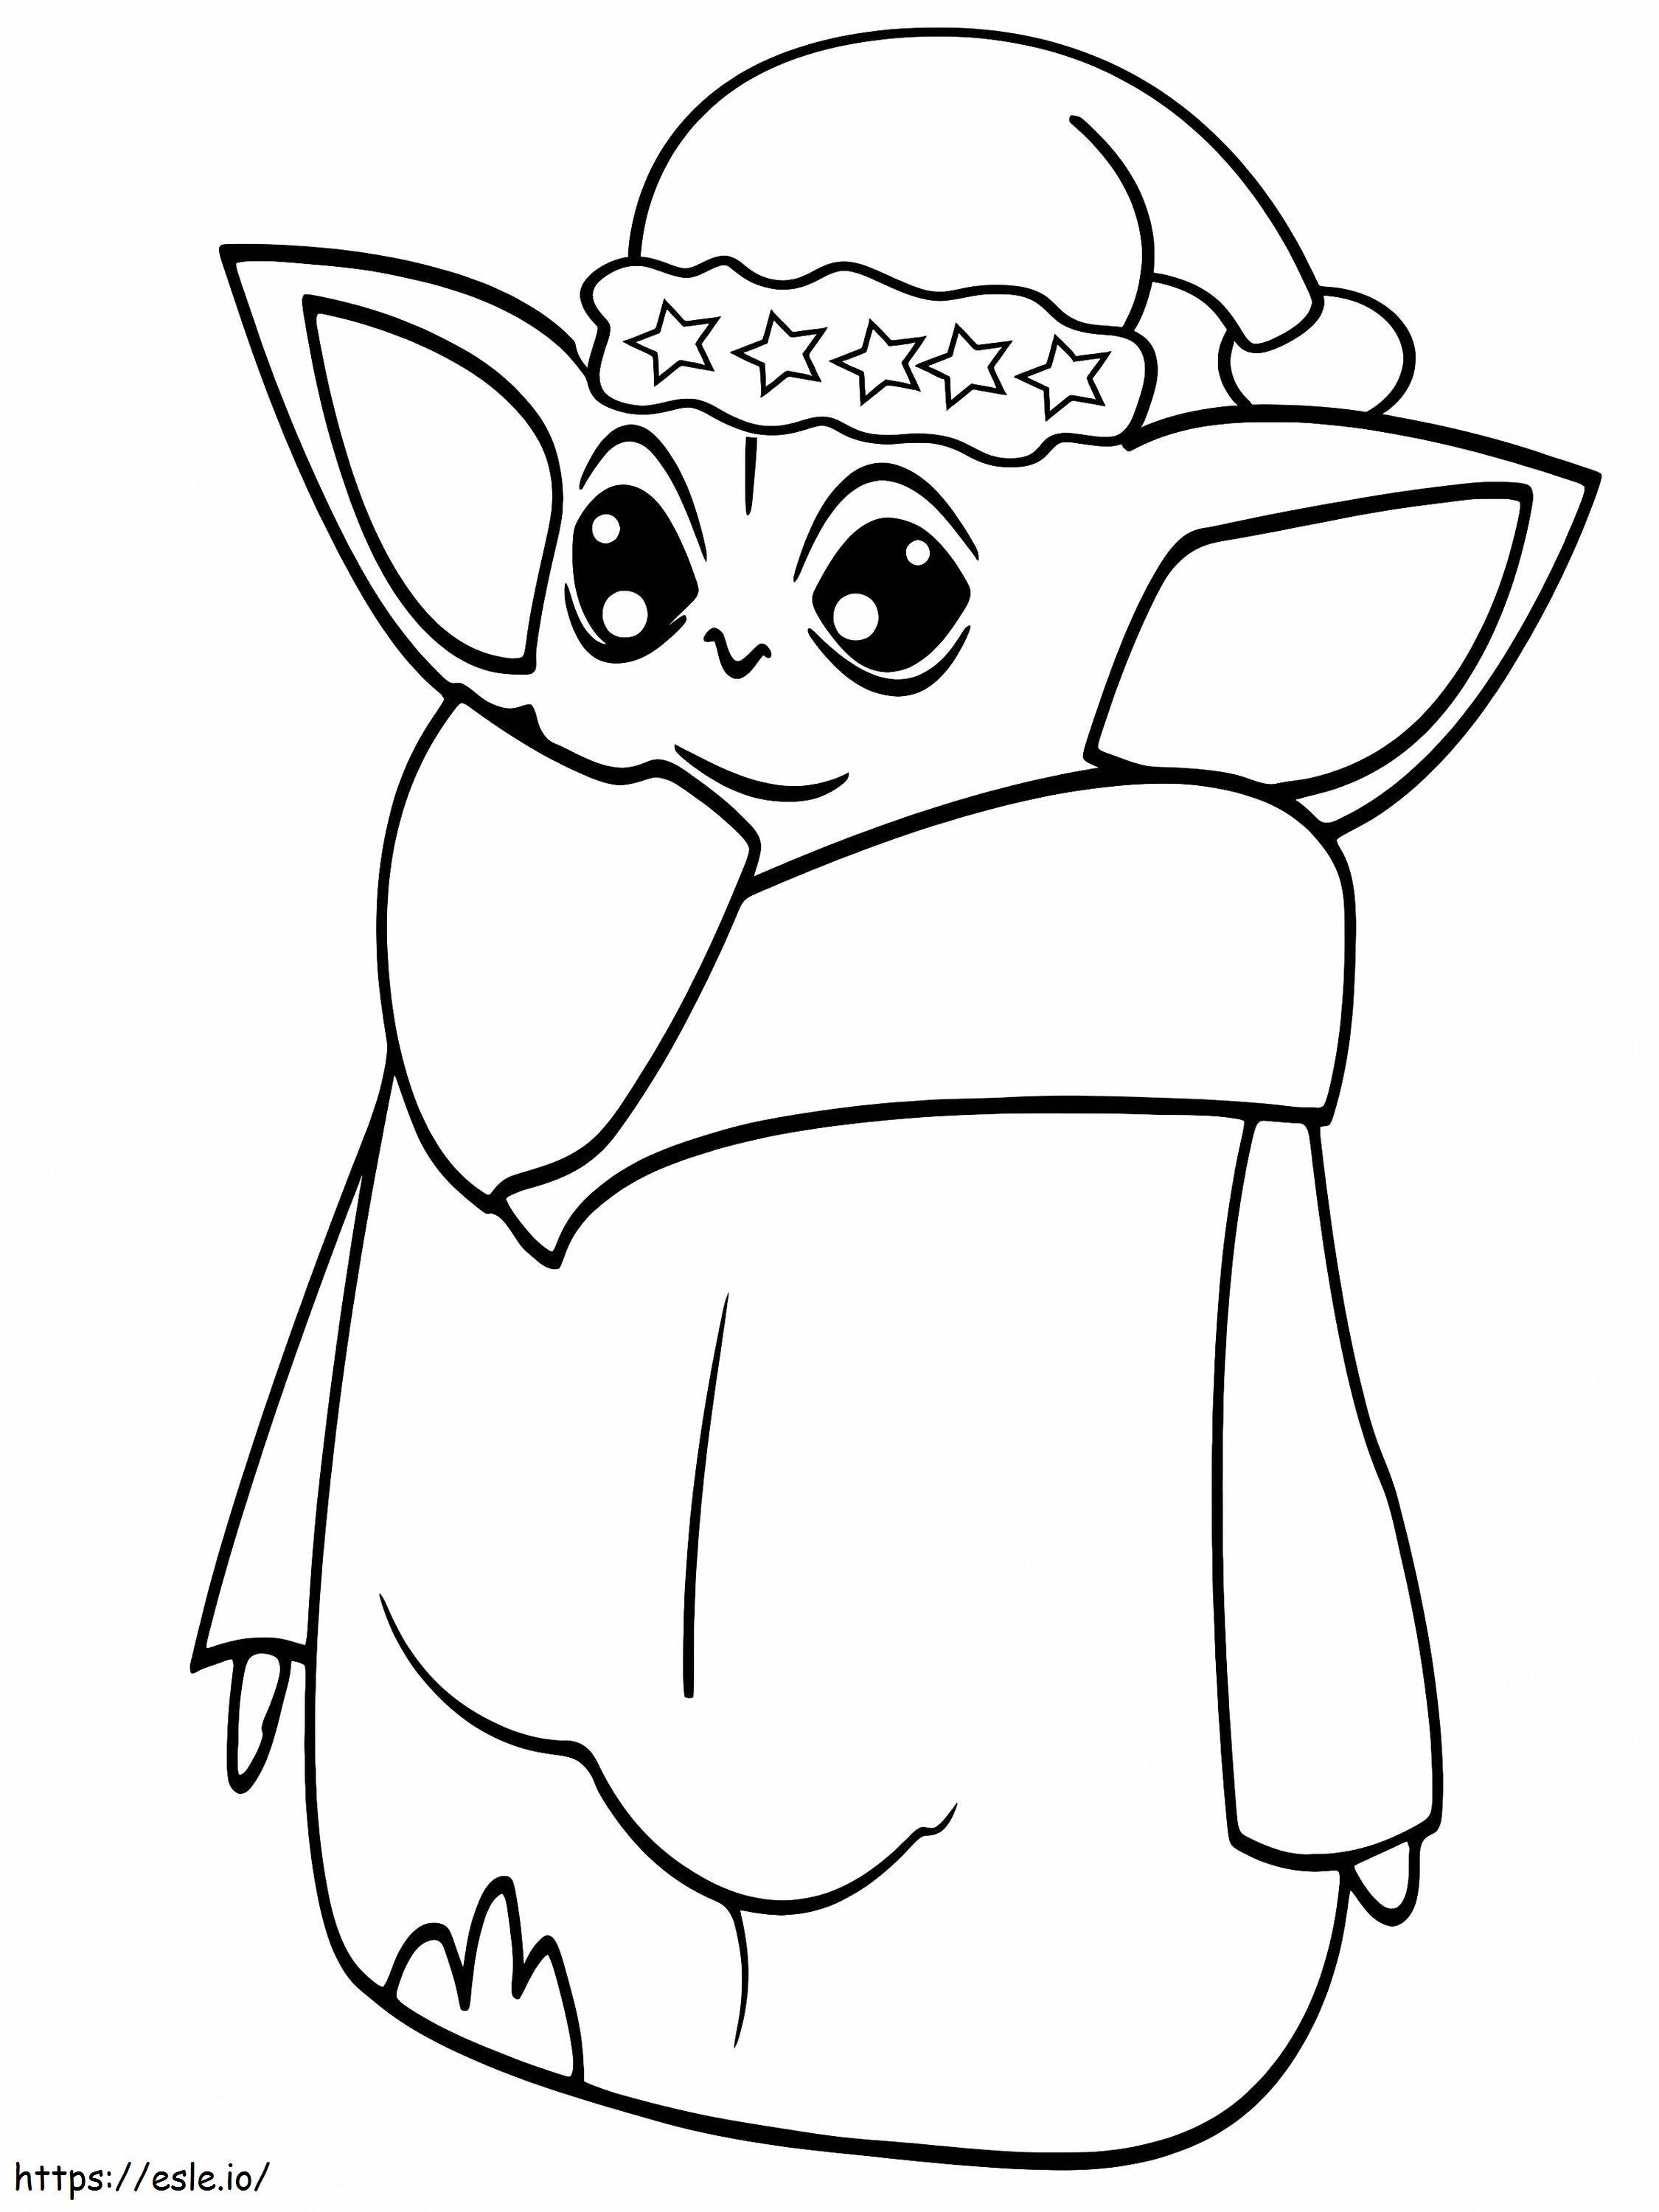 Baby Yoda Christmas Coloring Page 13 coloring page